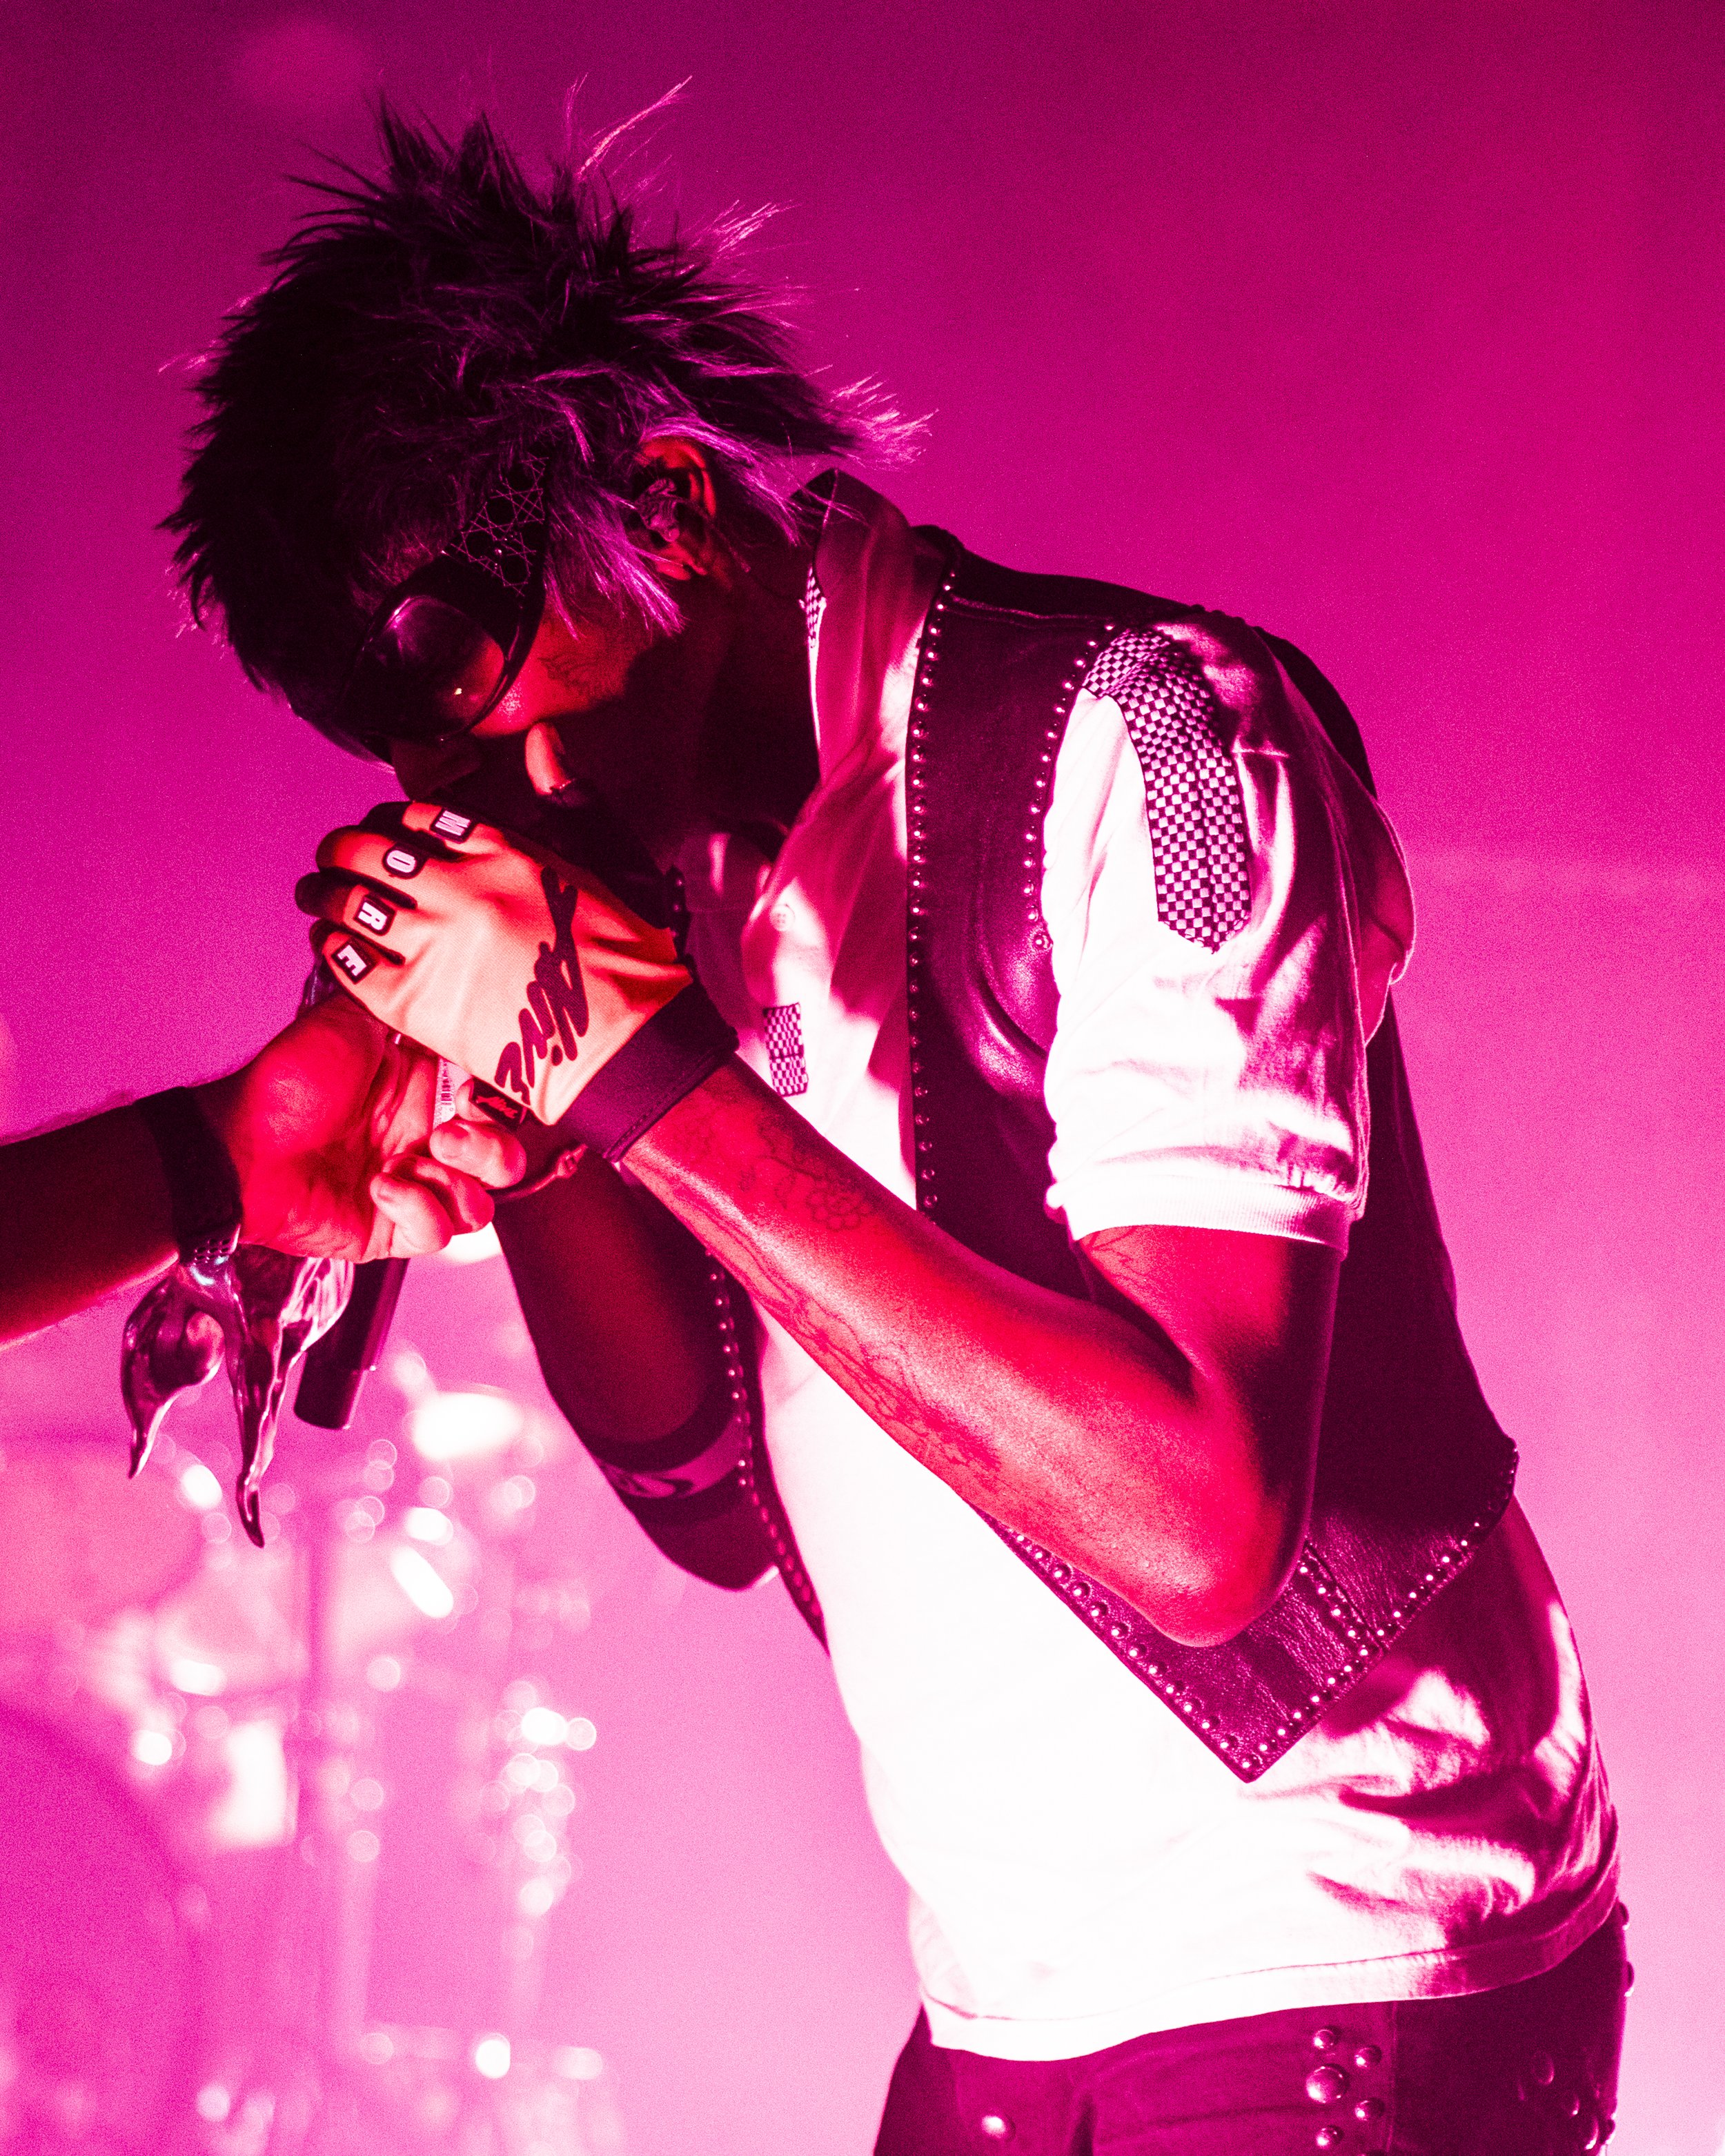 Yves Tumor - TO SPITE OR NOT TO SPITE TOUR - The Ogden Theatre - Denver, Colorado - Monday, May 15, 2023 - PHOTO BY Mowgli Miles of Interracial Friends-10.JPG